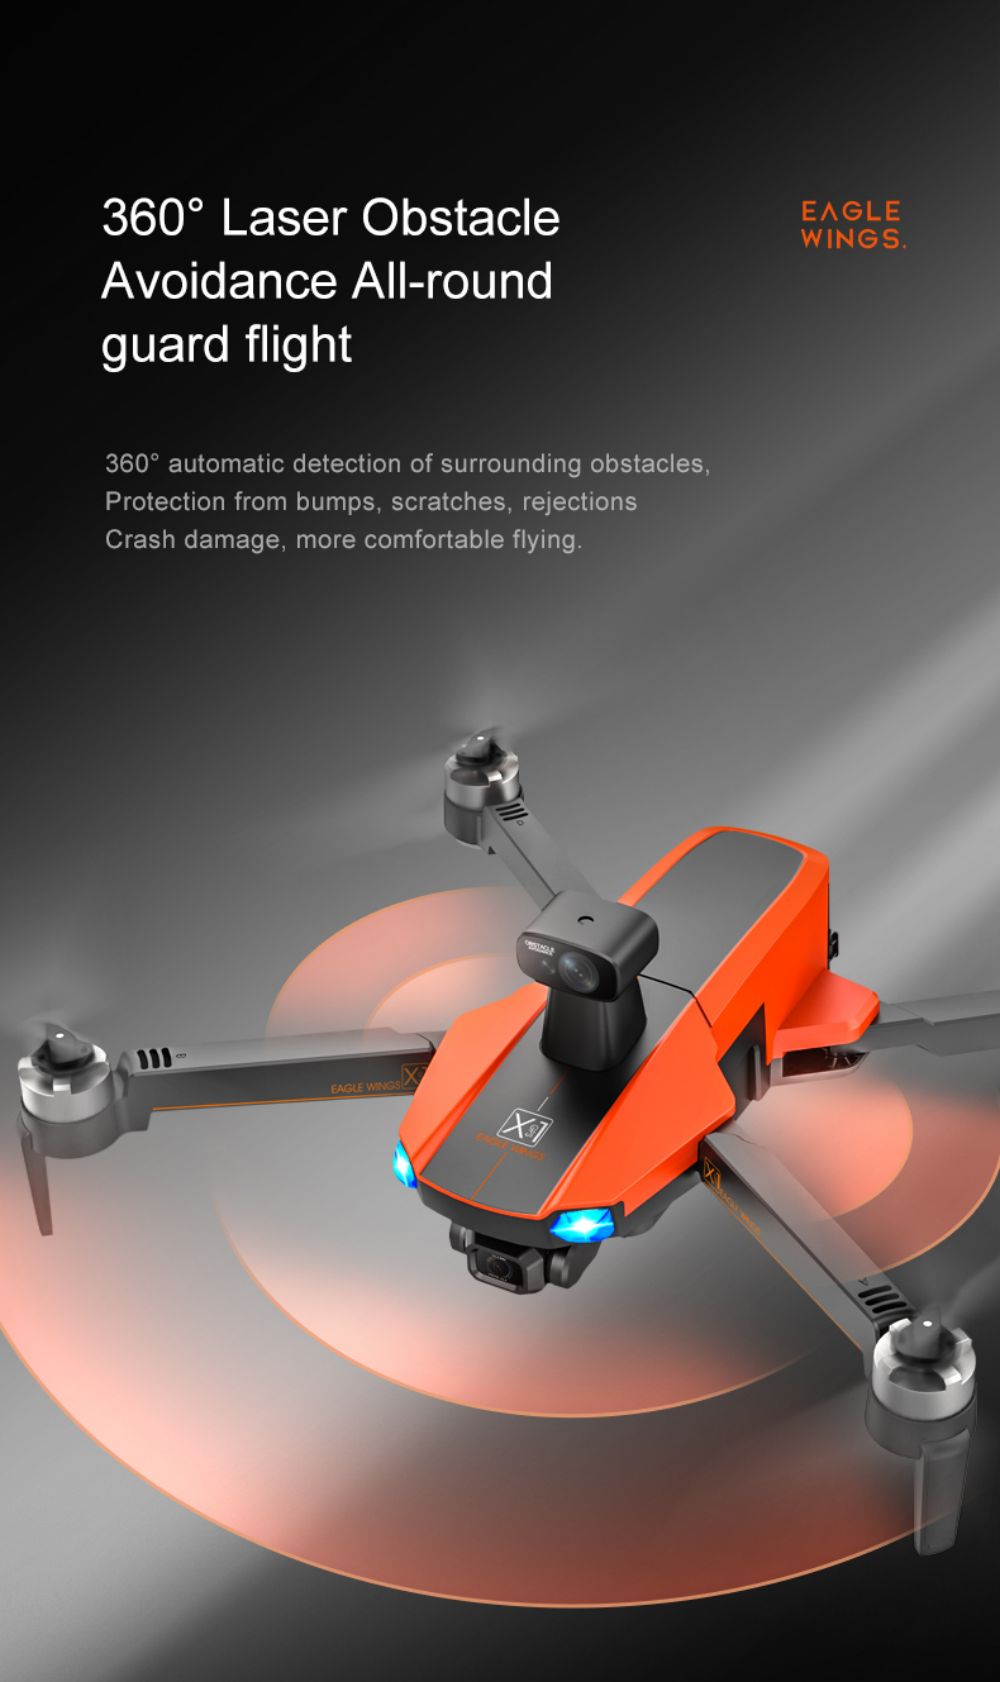 JJRC X22 GPS 5G WiFi FPV RC Drone 1080P HD Camera Obstacle Avoidance 3-Axis Gimbal Black & Orange 3 Batteries